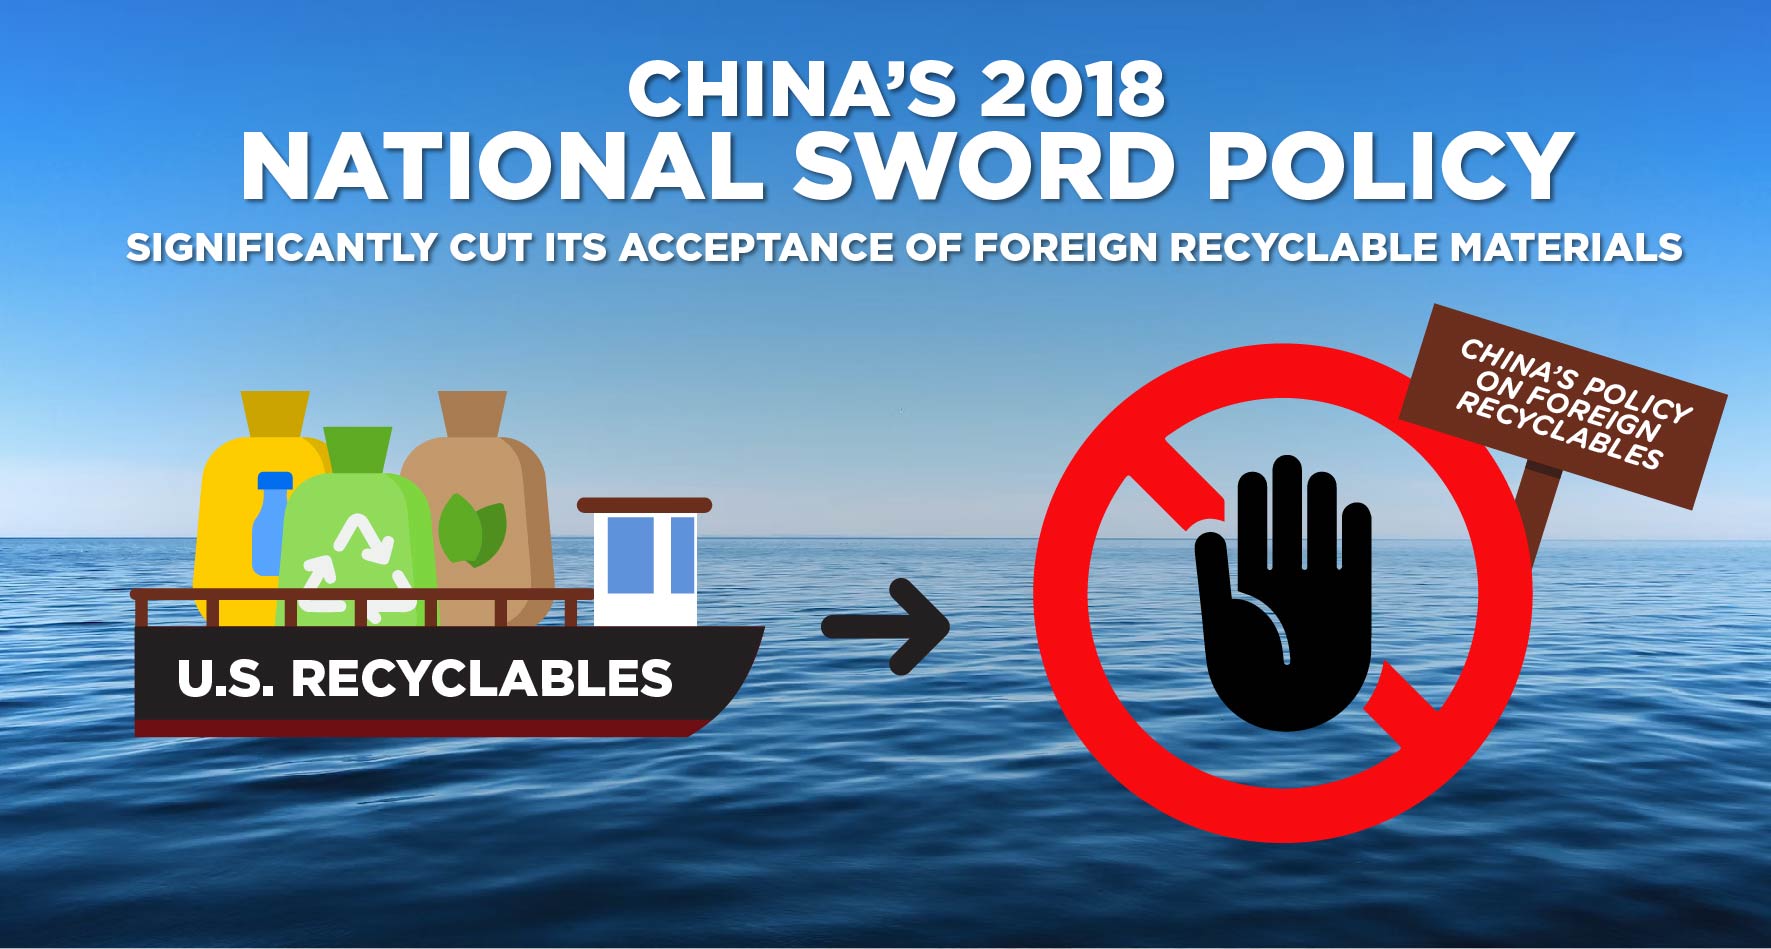 China's 2018 National Sword Policy and US Recyclables